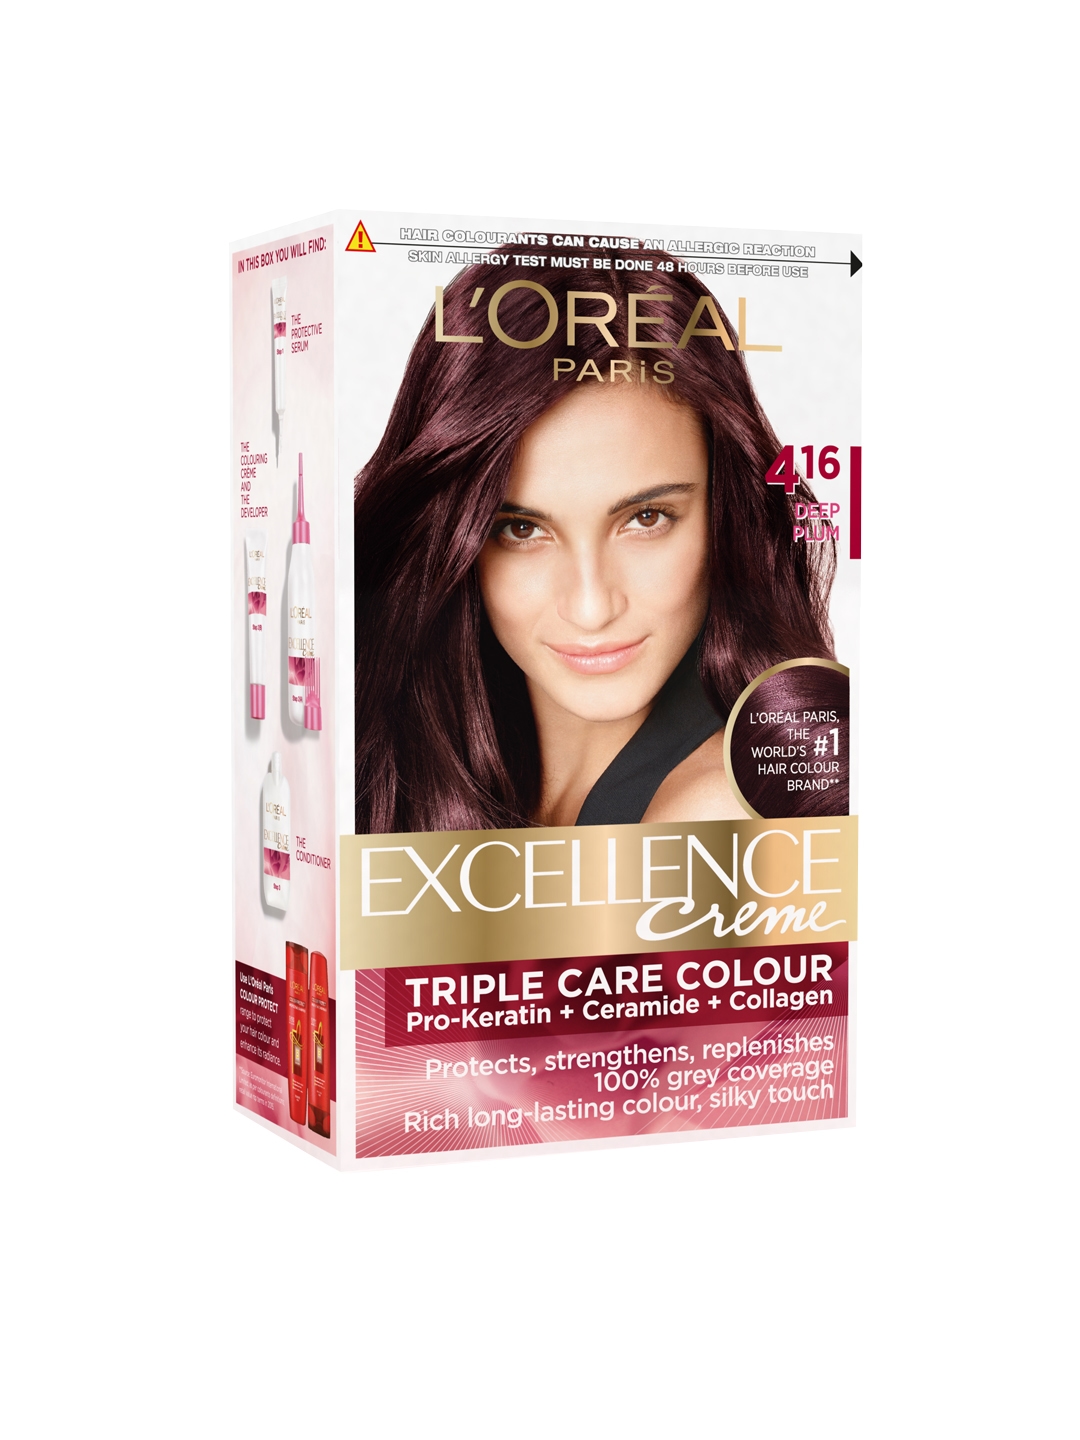 Buy Loreal Paris Casting Creme Gloss Hair Colour Online at Best Price of Rs  649 - bigbasket